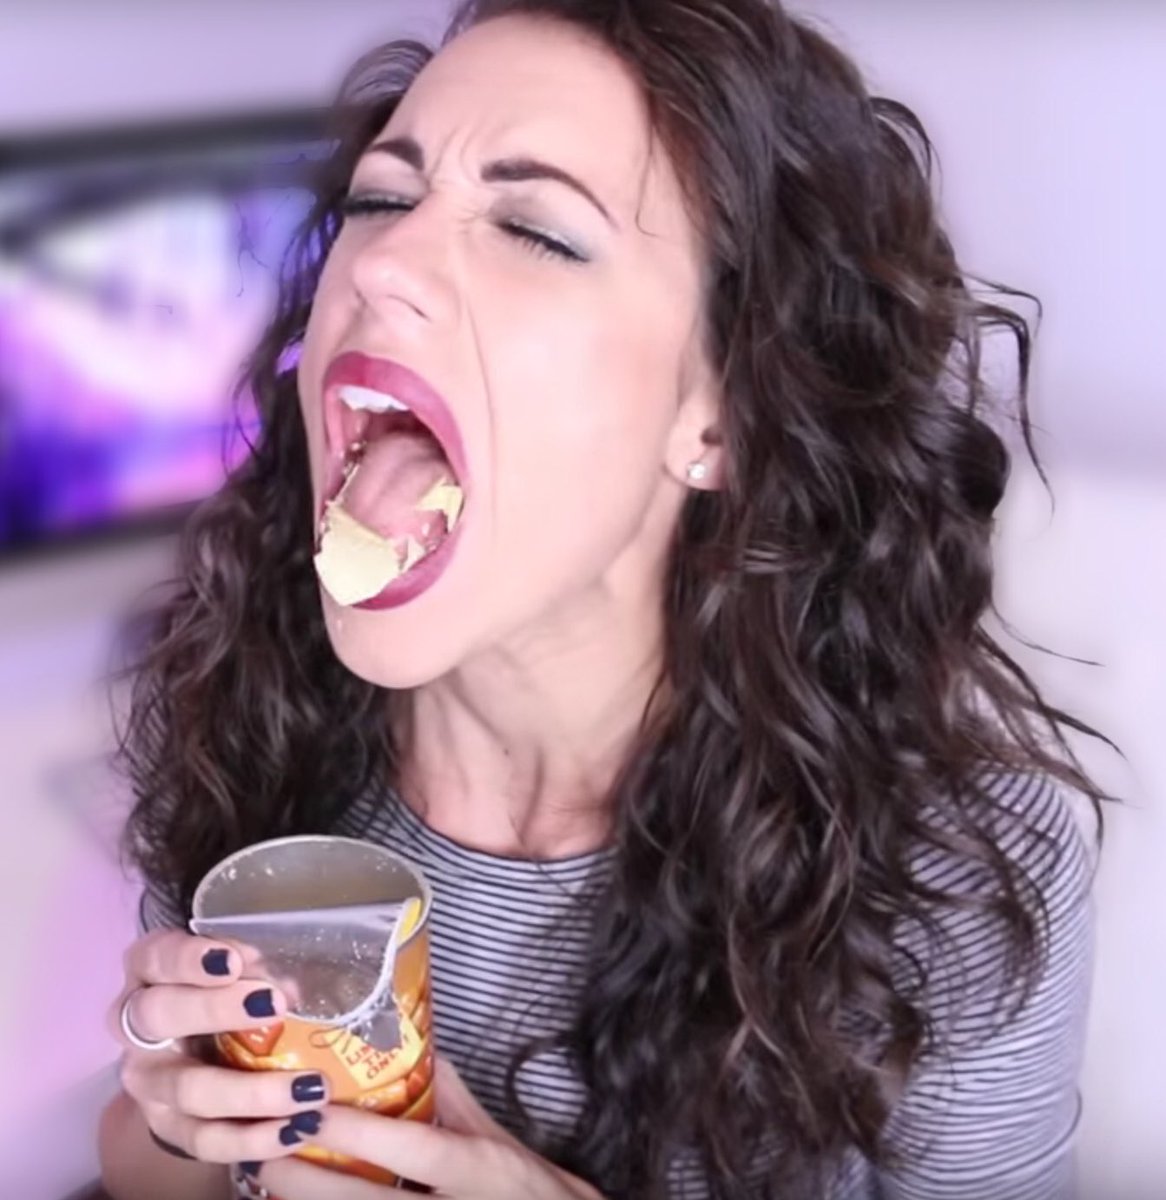 Colleen Ballinger🎗 on X: Did you watch my new video yet?!? I eat sweet  Pringles and THEY NASTY. t.conynJI9bVPU t.comx8IDsTS0G   X